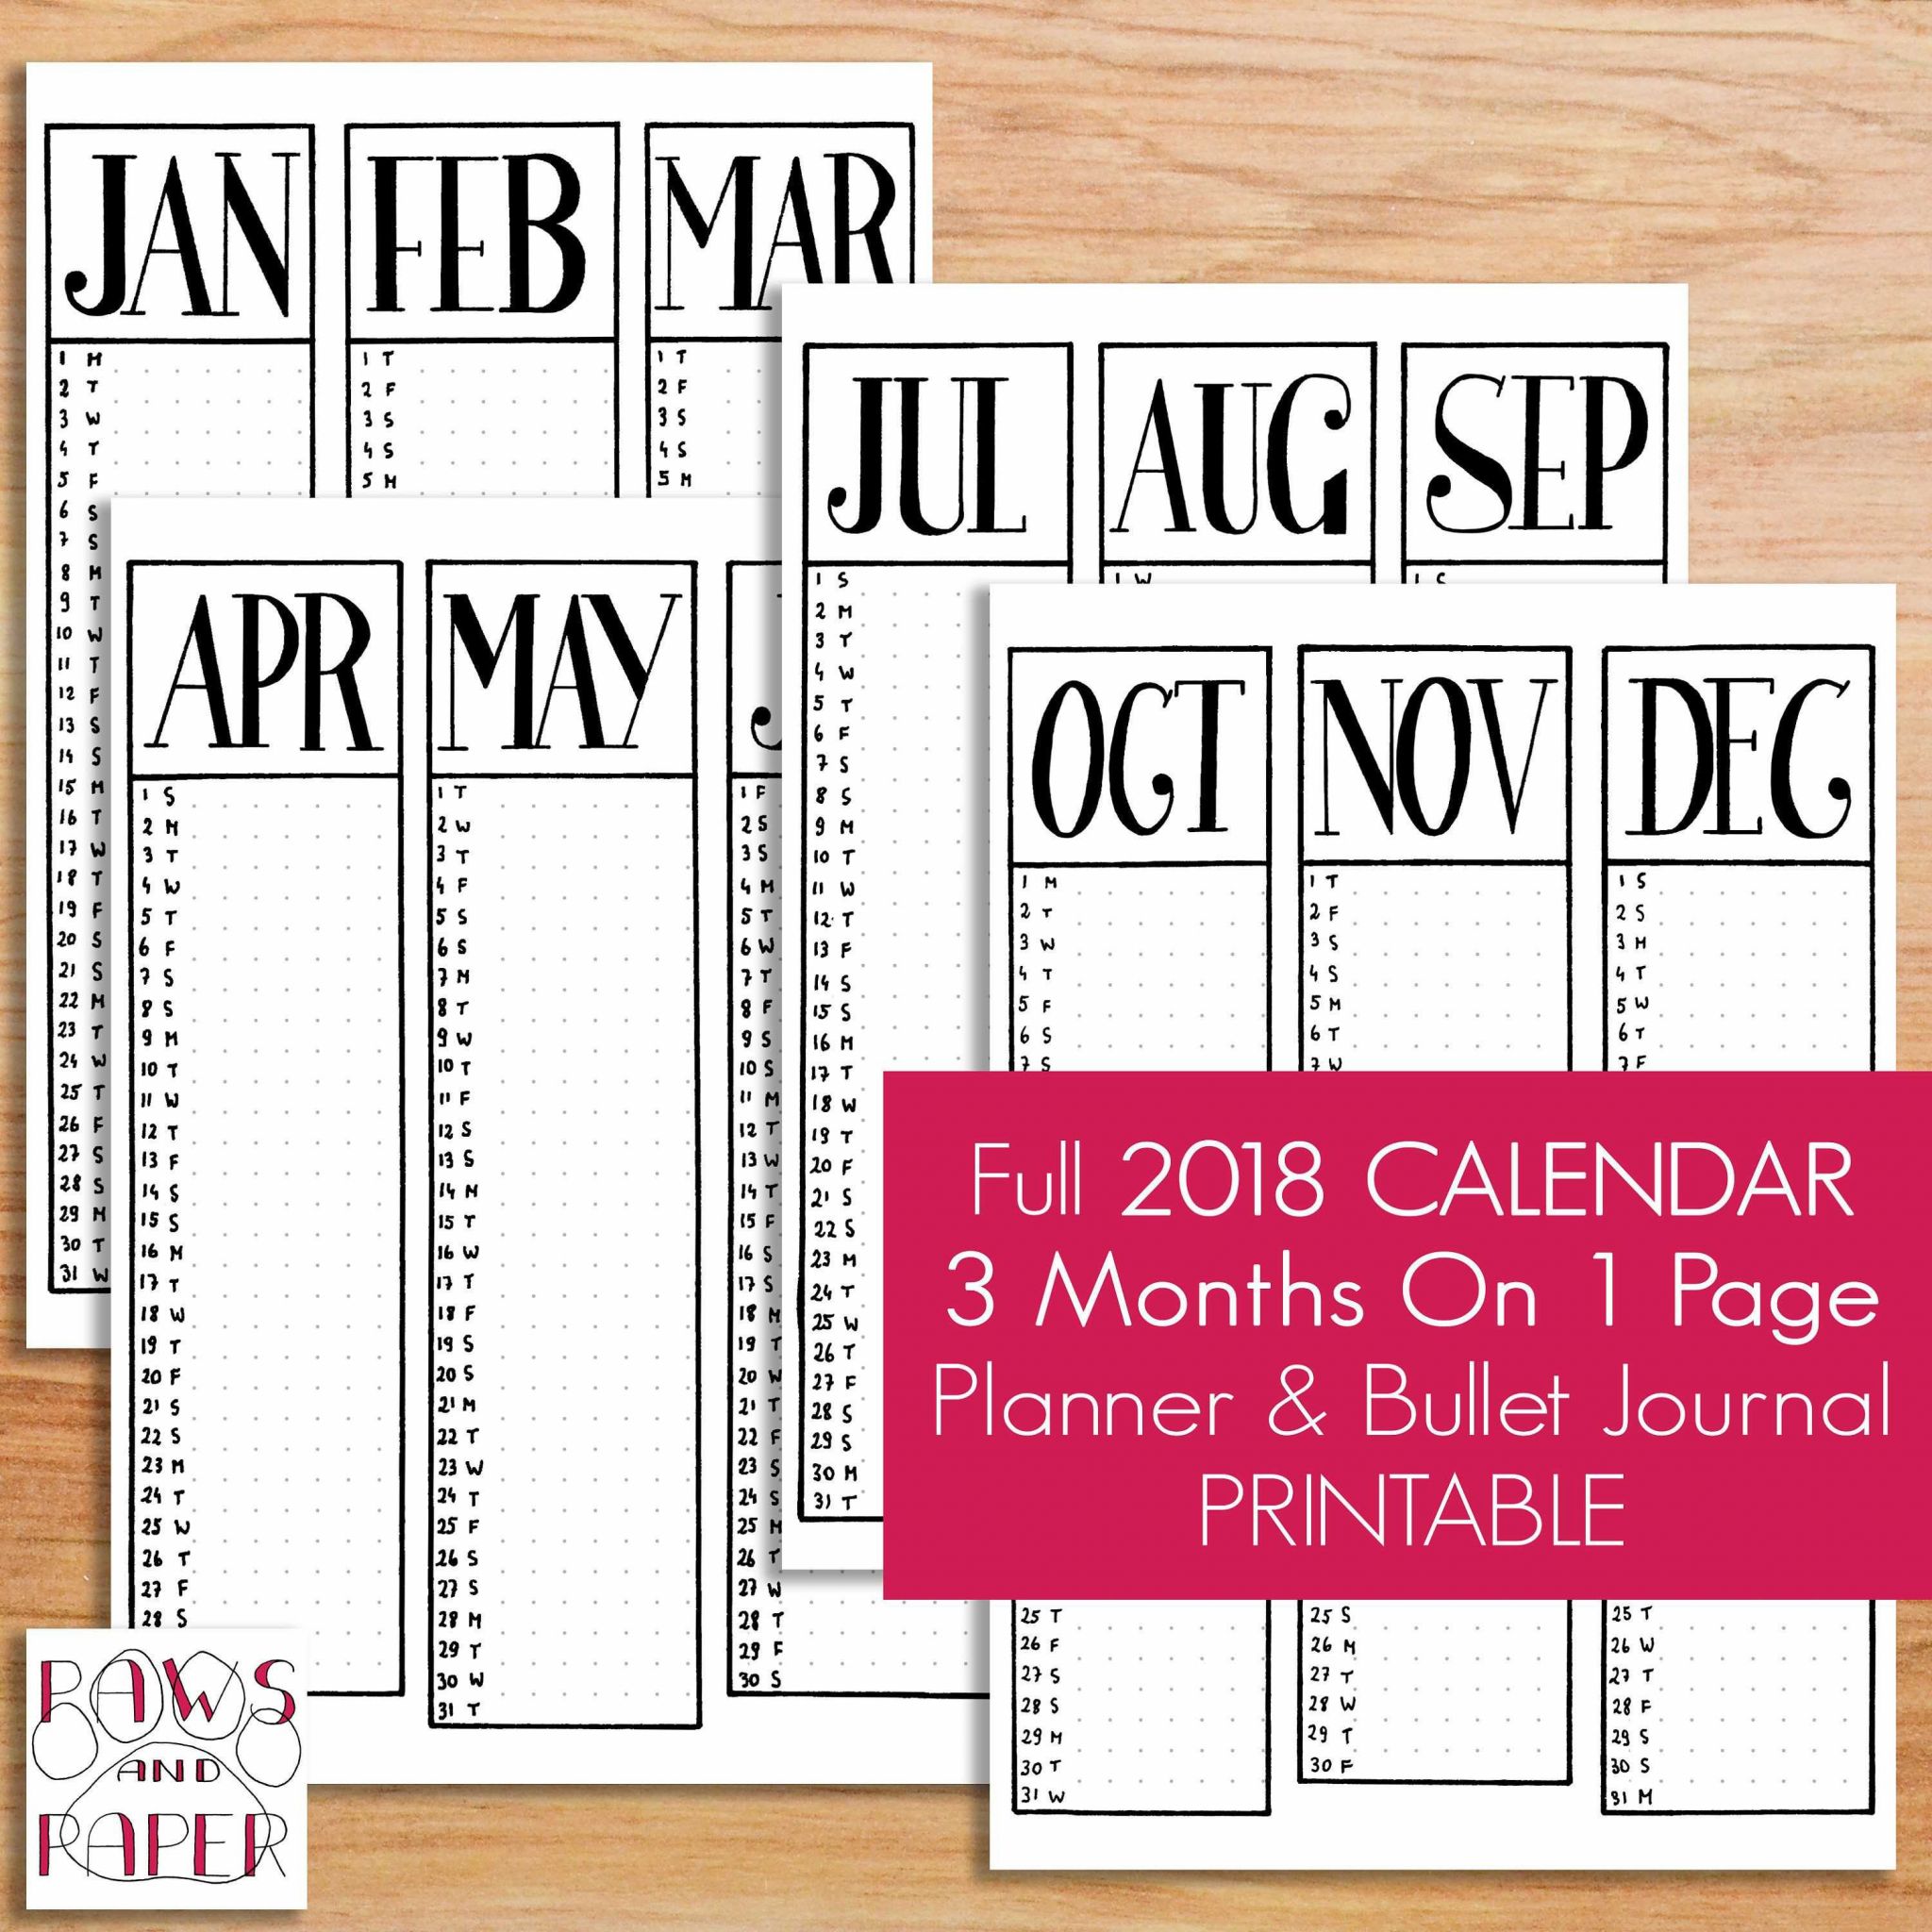 Science tools Worksheet together with Printable Calendar for 2018 Awesome 2018 Calendar Printable Unique